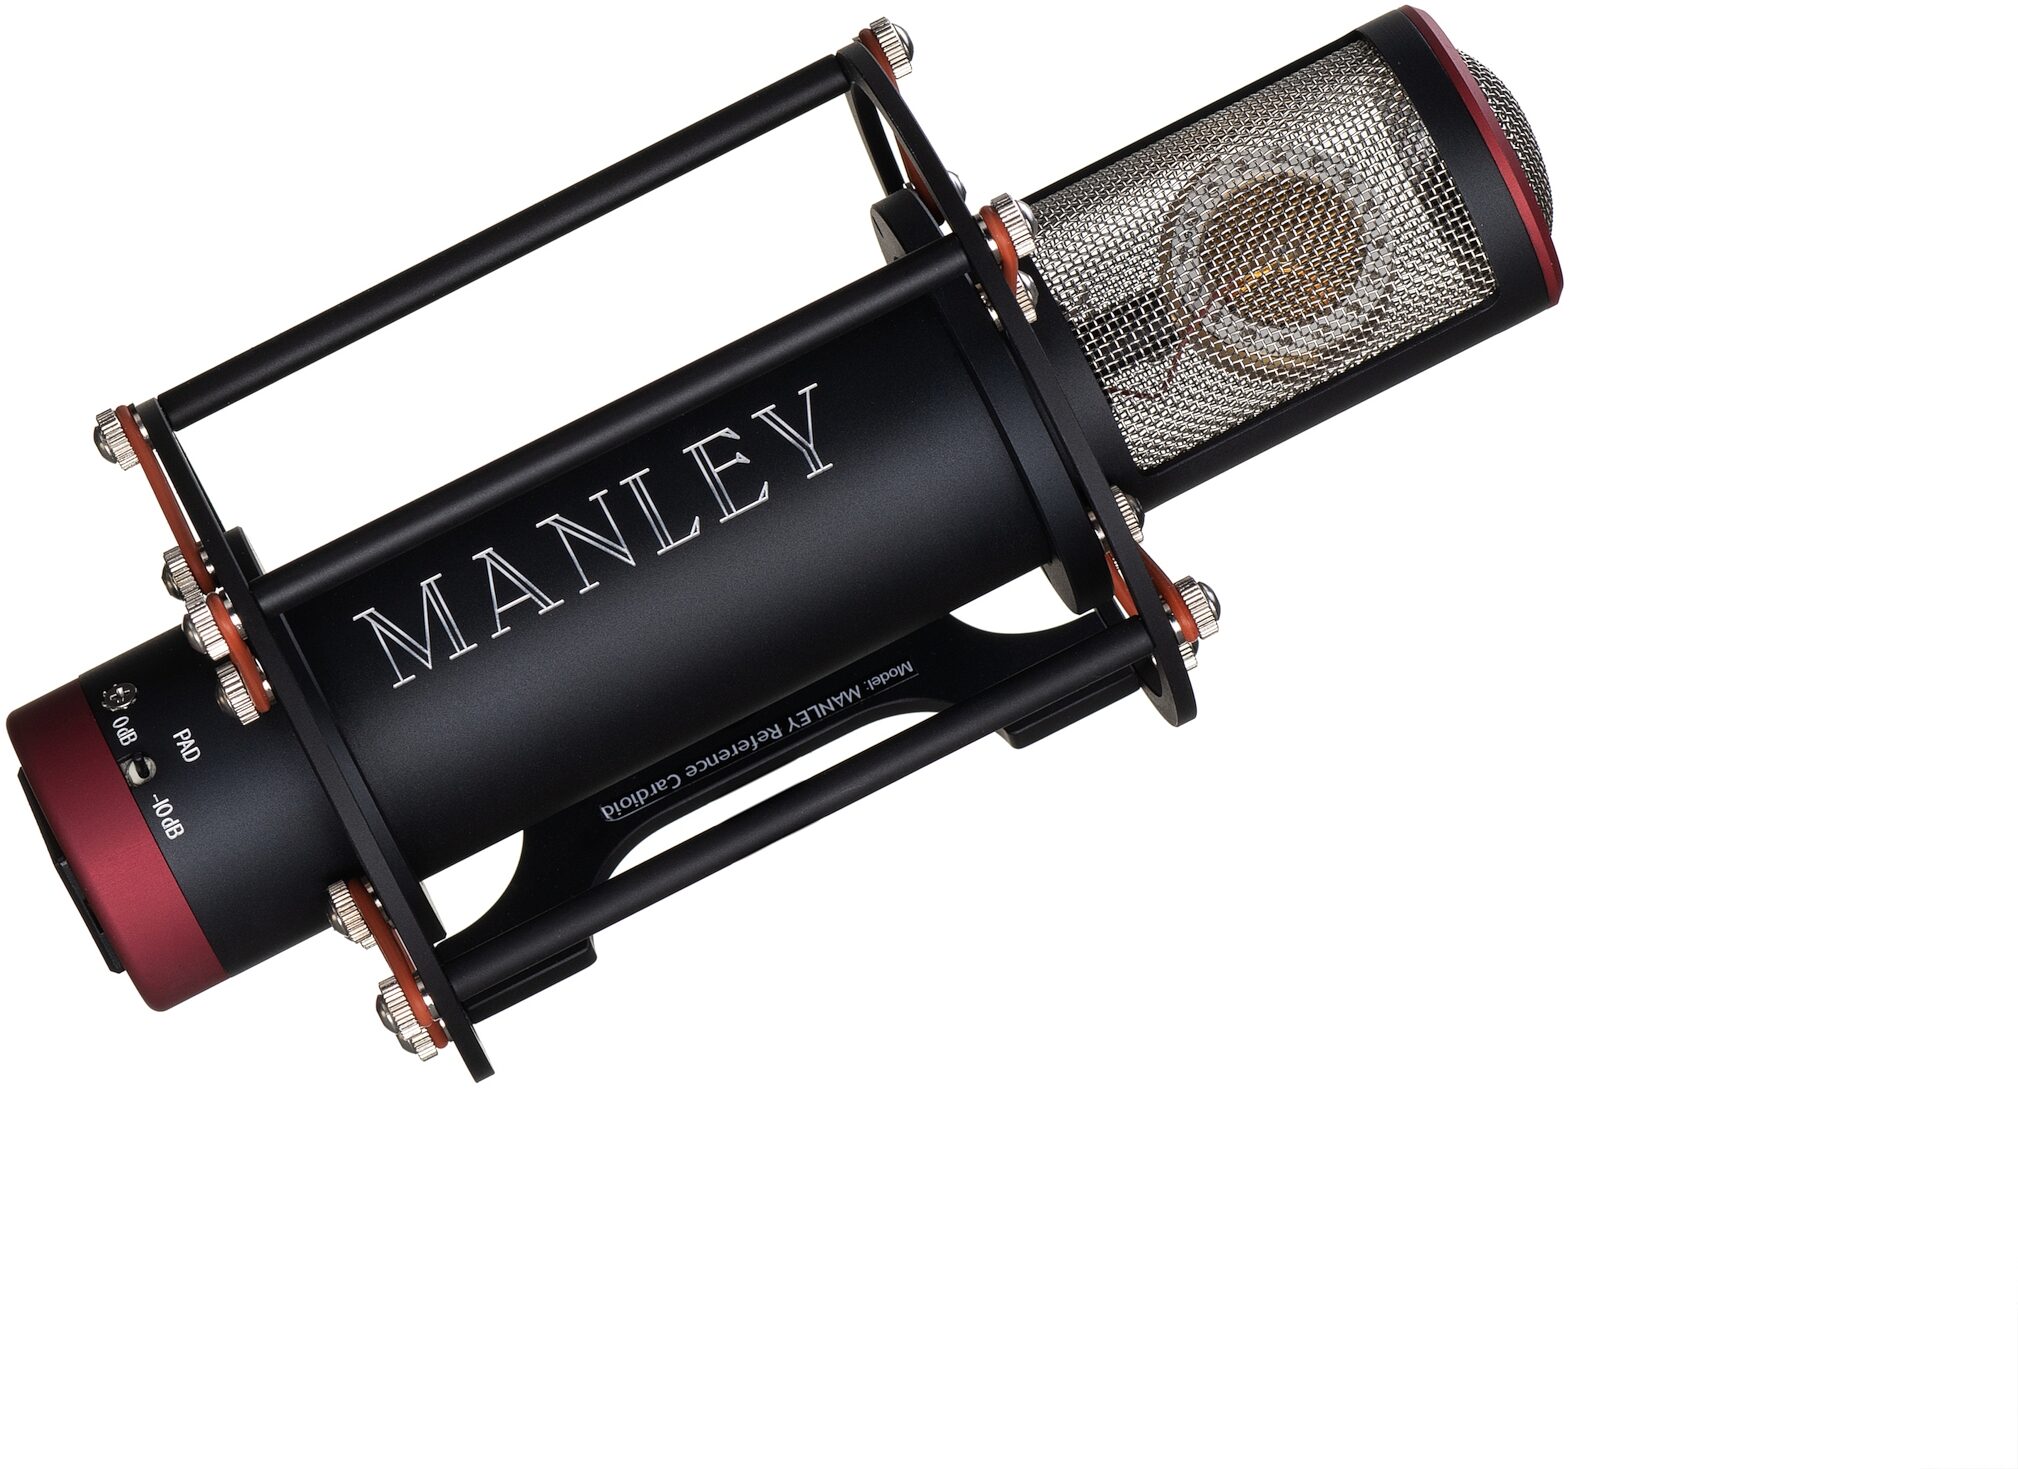 MANLEY REFERENCE CARDIOID MICROPHONE